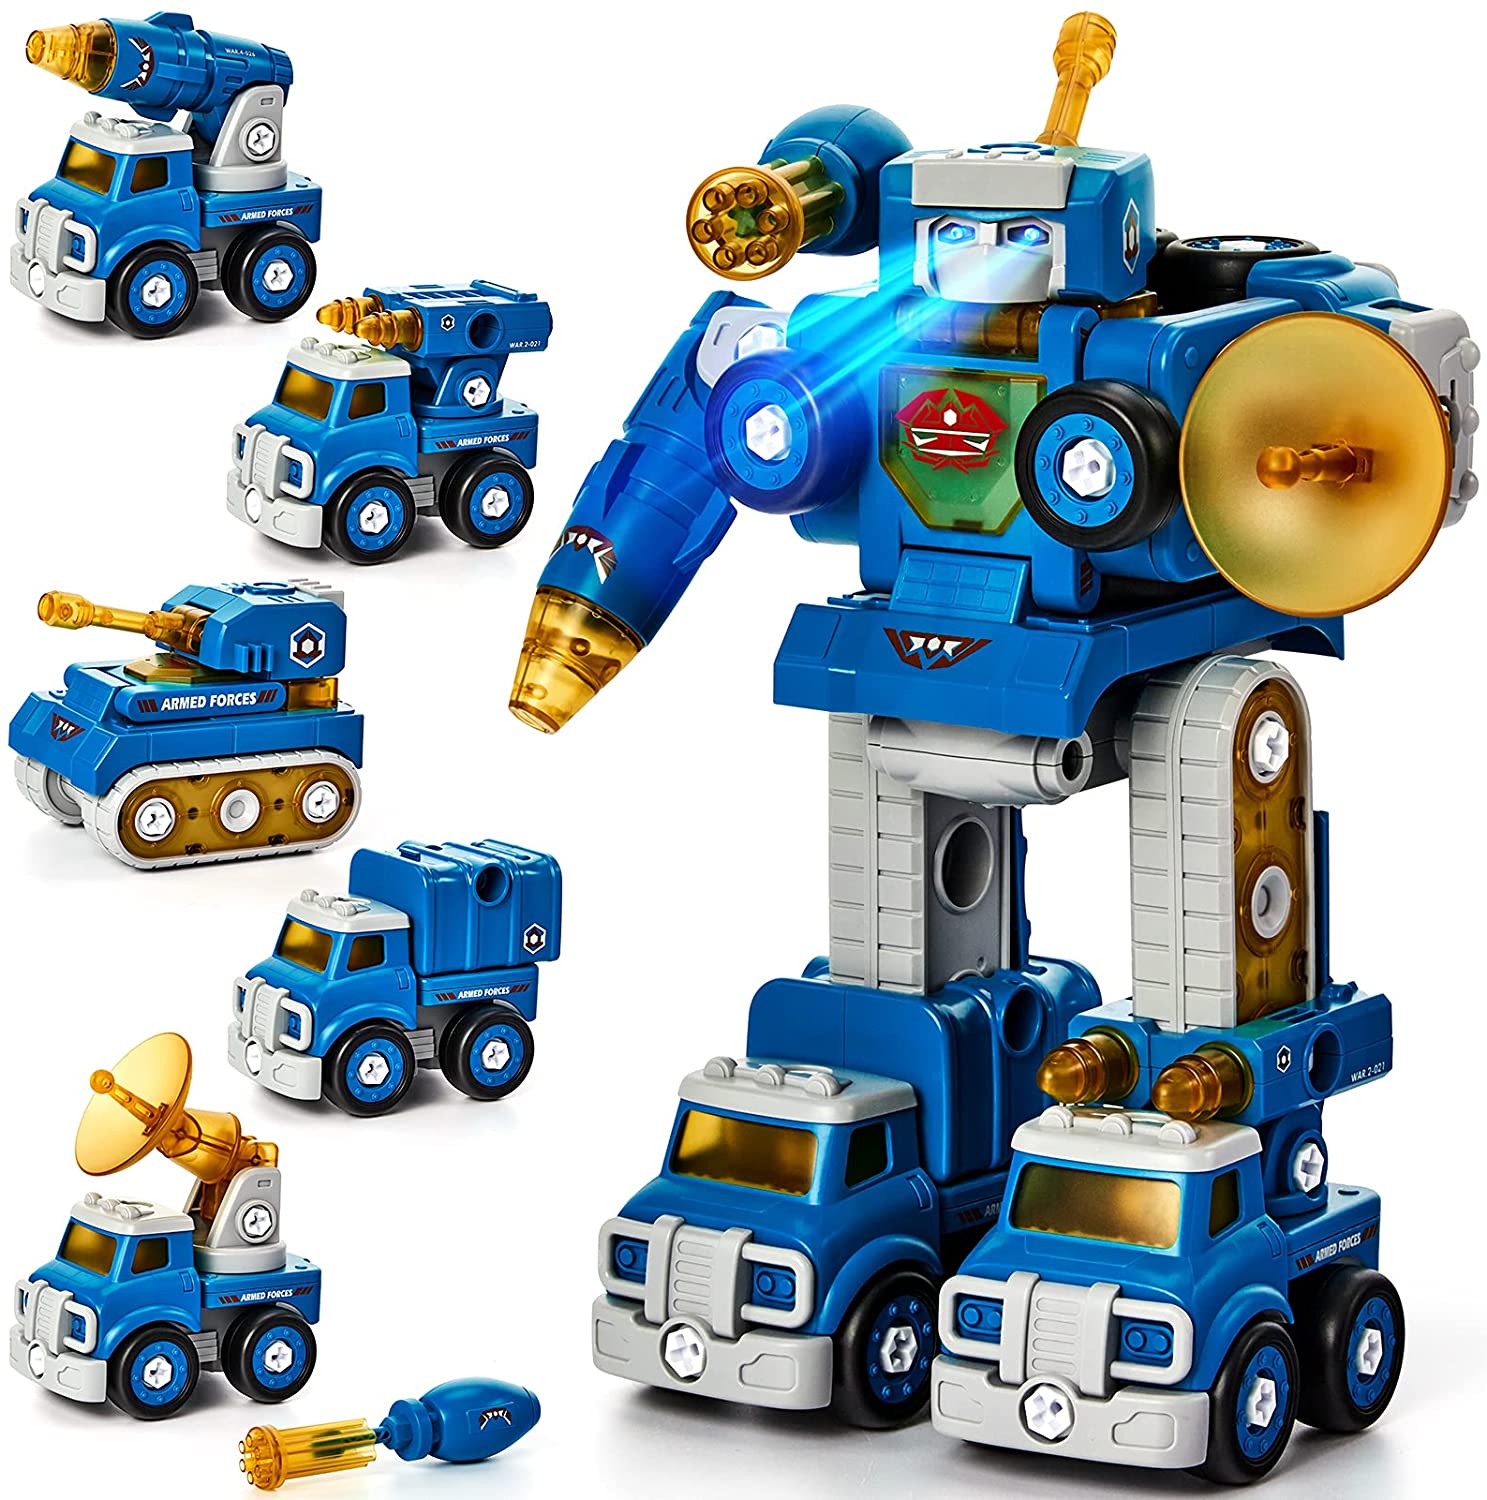 Take Apart Robot Toys Vehicle Set 5 in 1 Construction Toys for 5 Year Old Boys